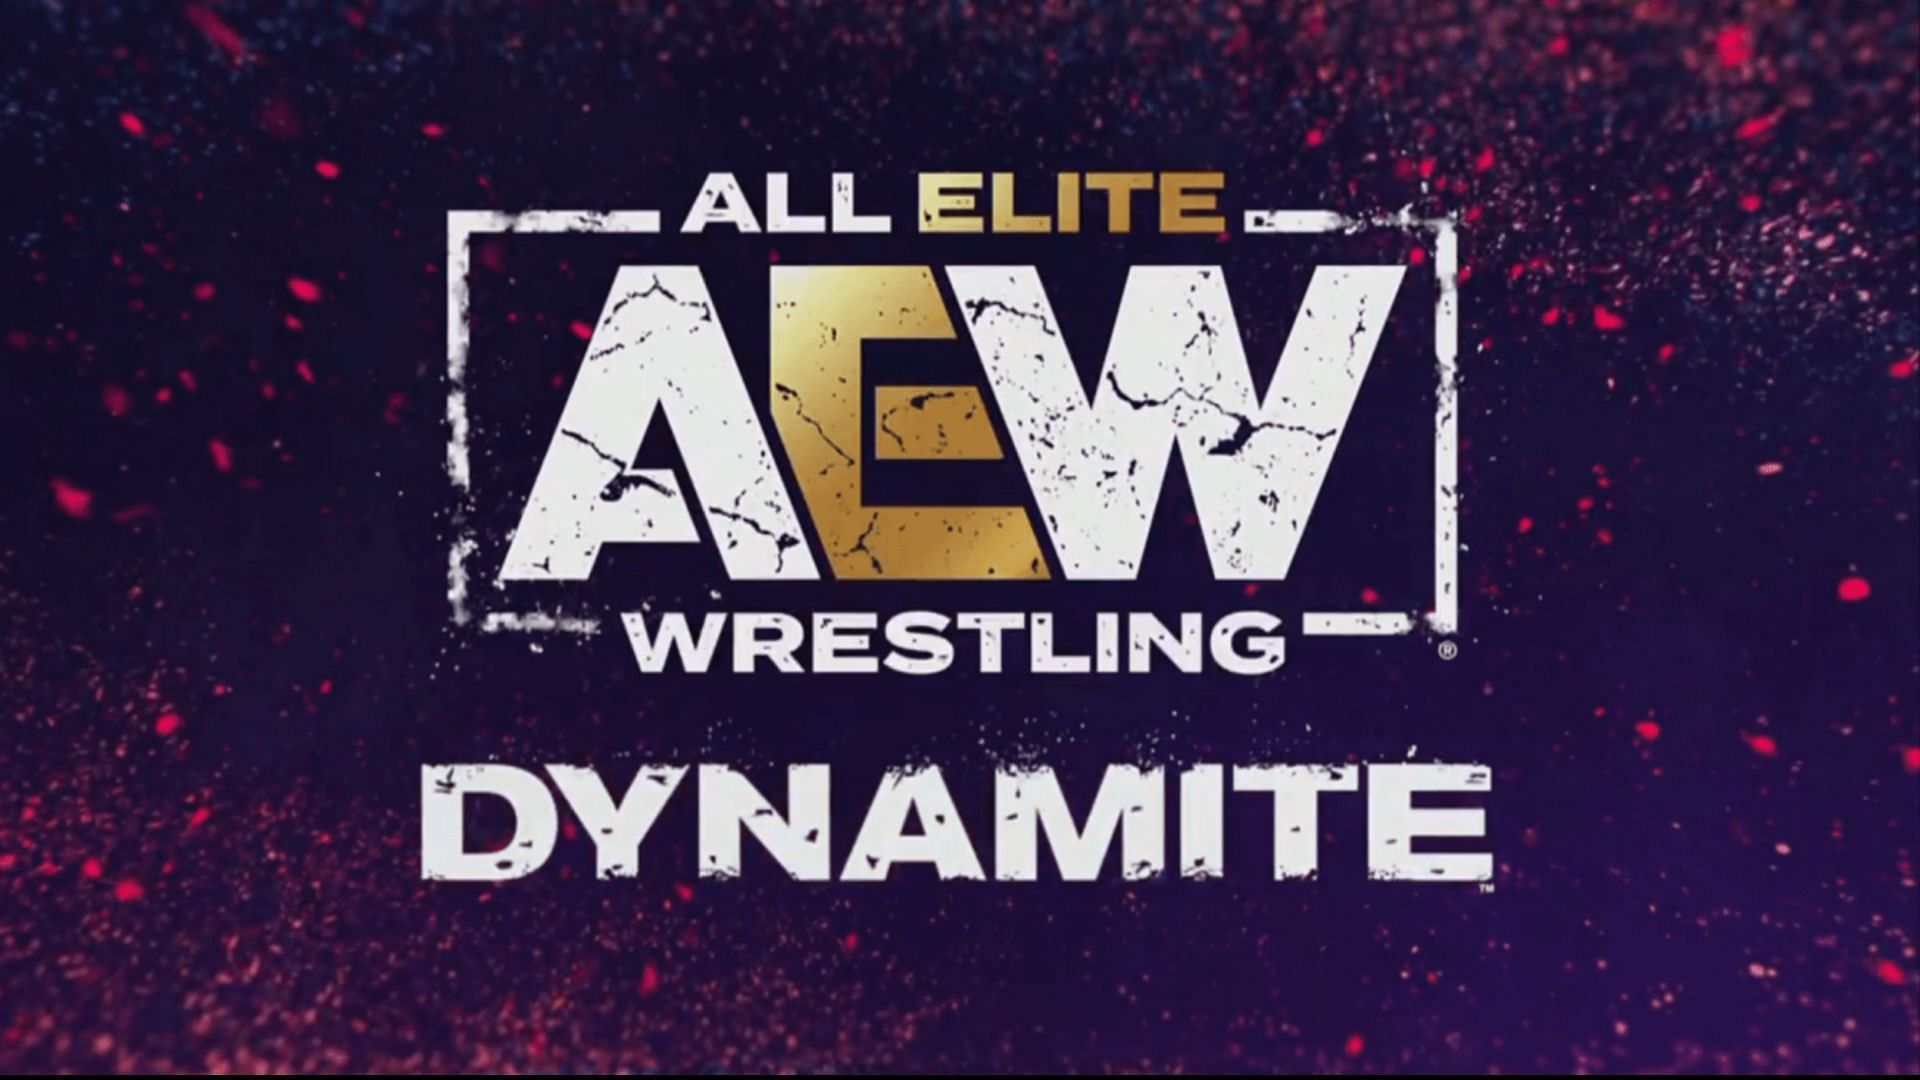 AEW Dynamite is the weekly episodic show of the brand